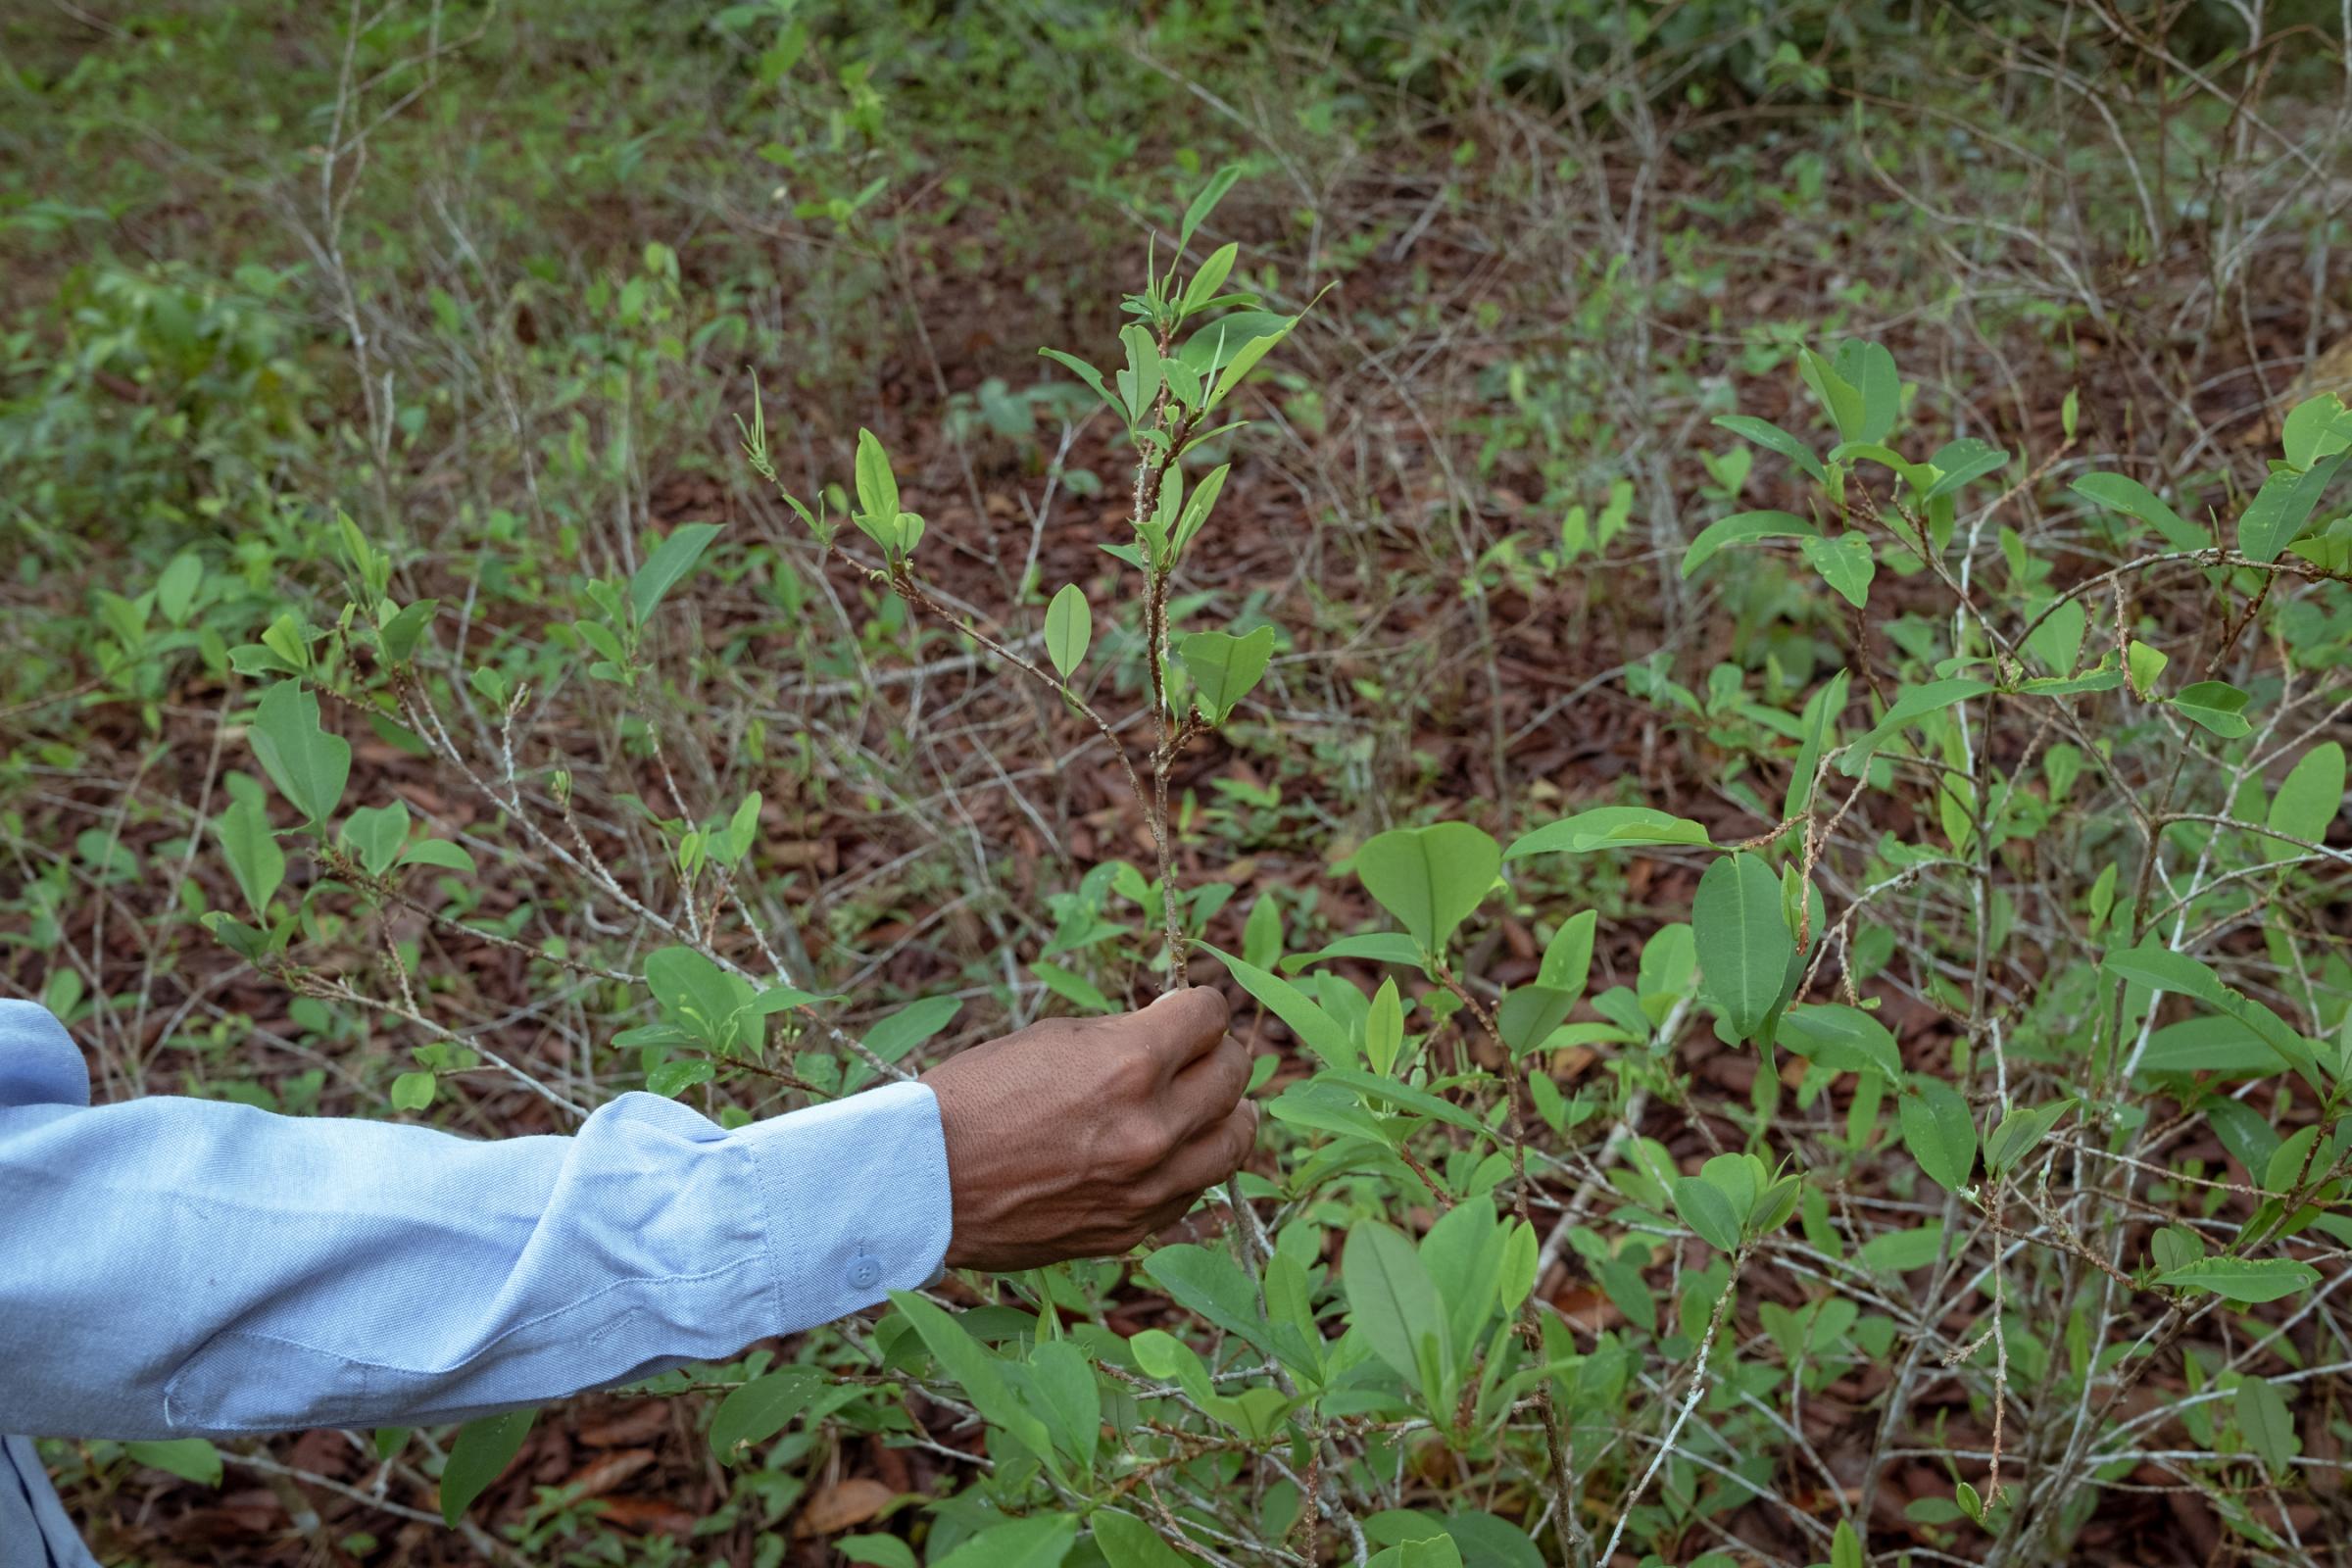 Kakataibo, voices from the forest - Coca leaves from an illegal plantation that drug...